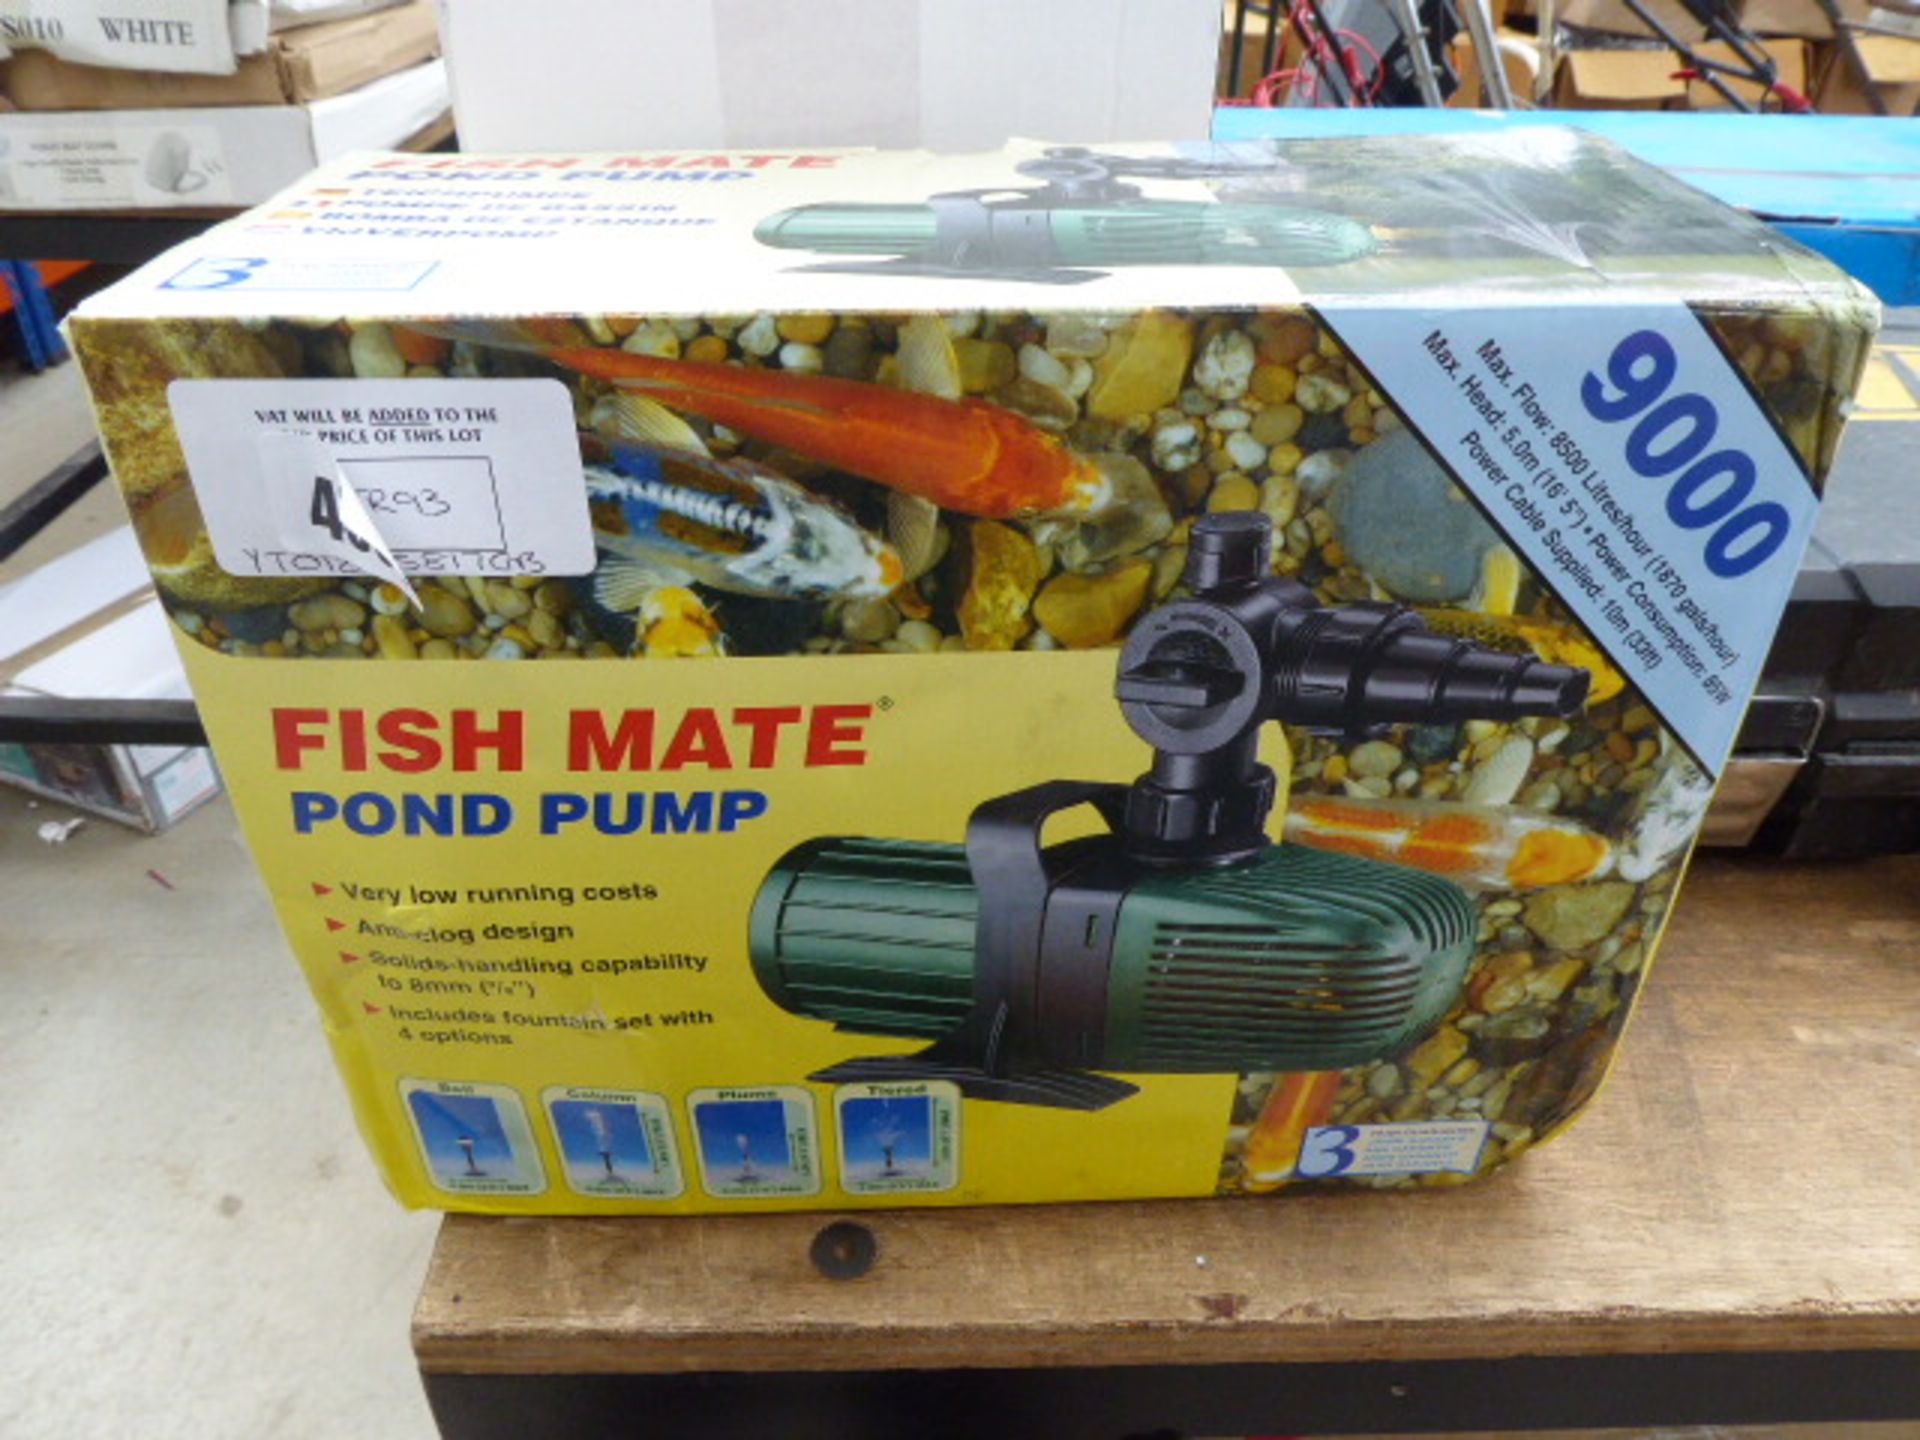 Fishmate pond pump and a small sprayer